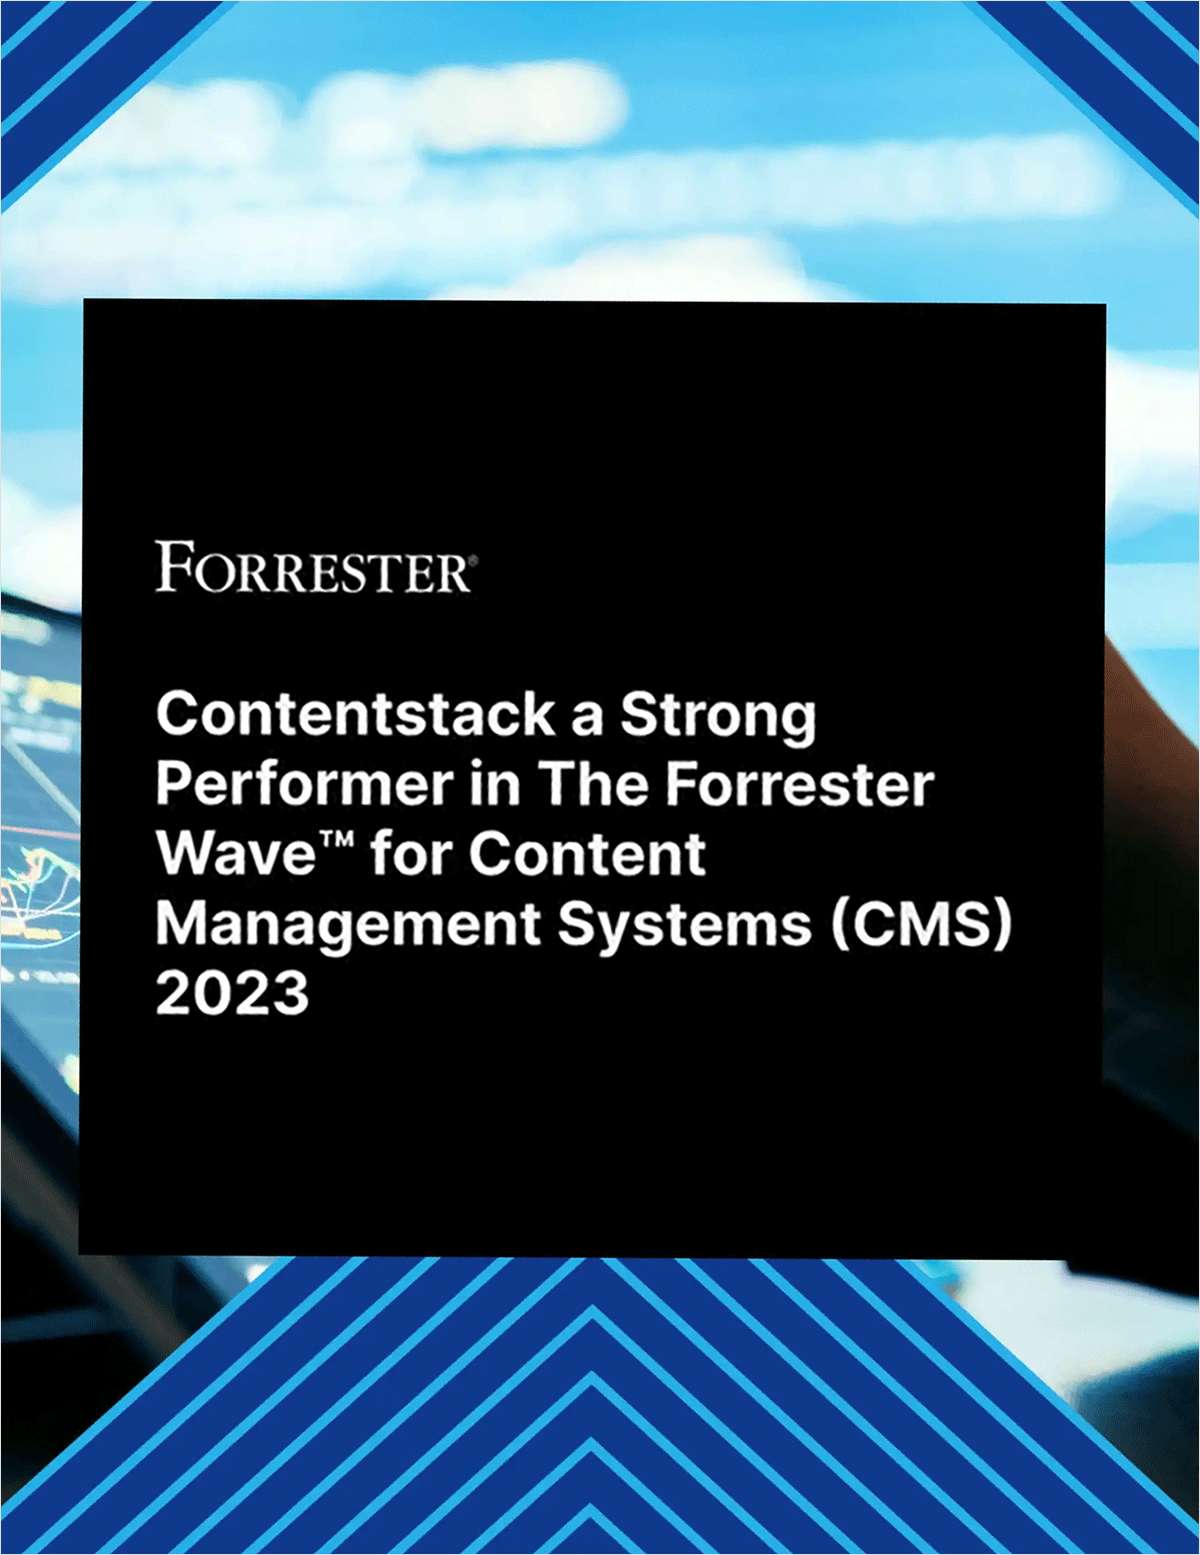 The Forrester Wave™: Content Management Systems, Q3 2023